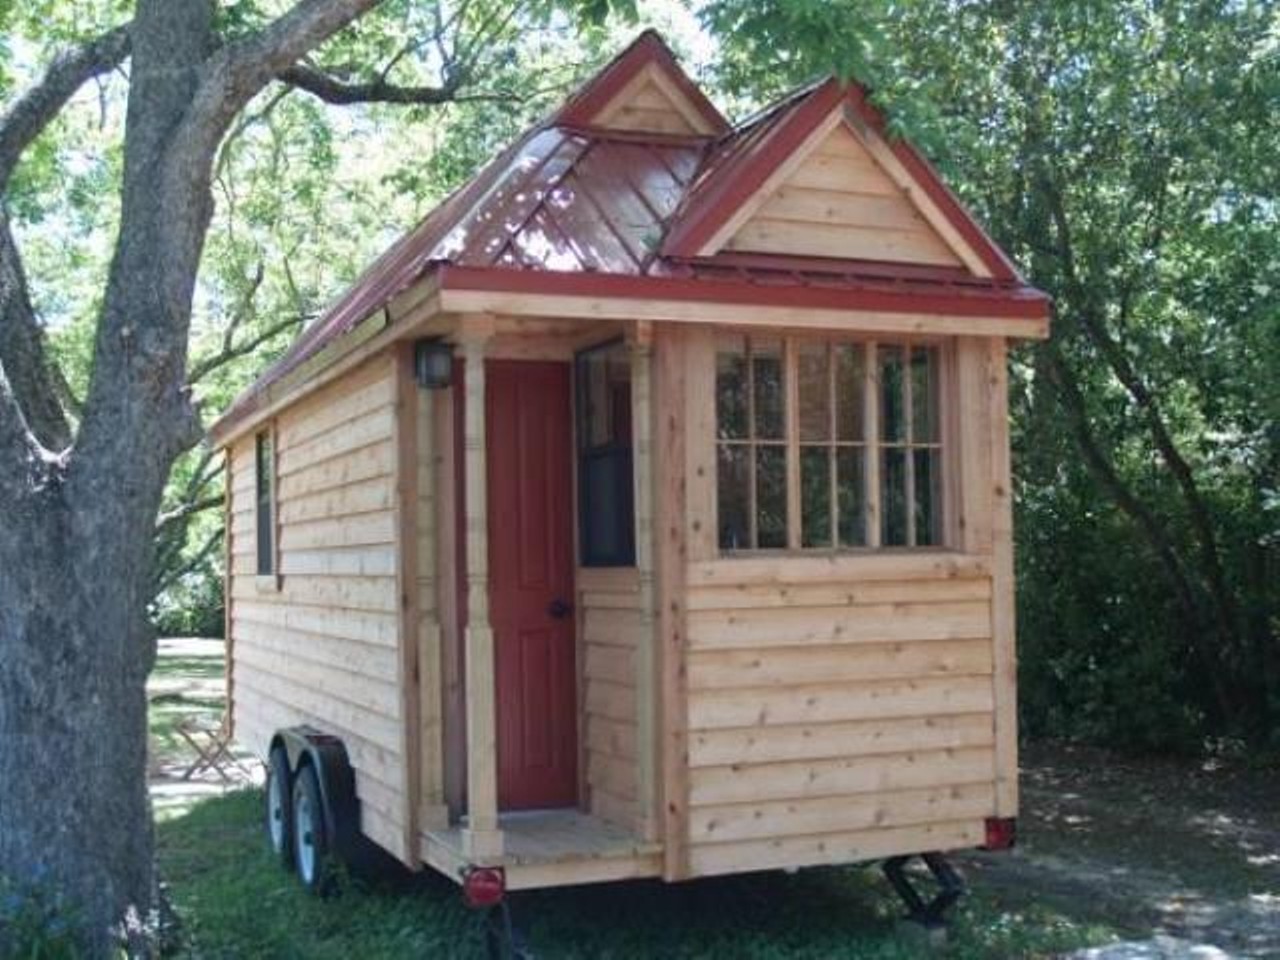 Tumbleweed Cypress 20
Price: $44000
Size: 144 sq ft 
This tiny house is a mini palace&#150; it's fully insulated, has double-paned windows and comes with a 40 gallon water tank.